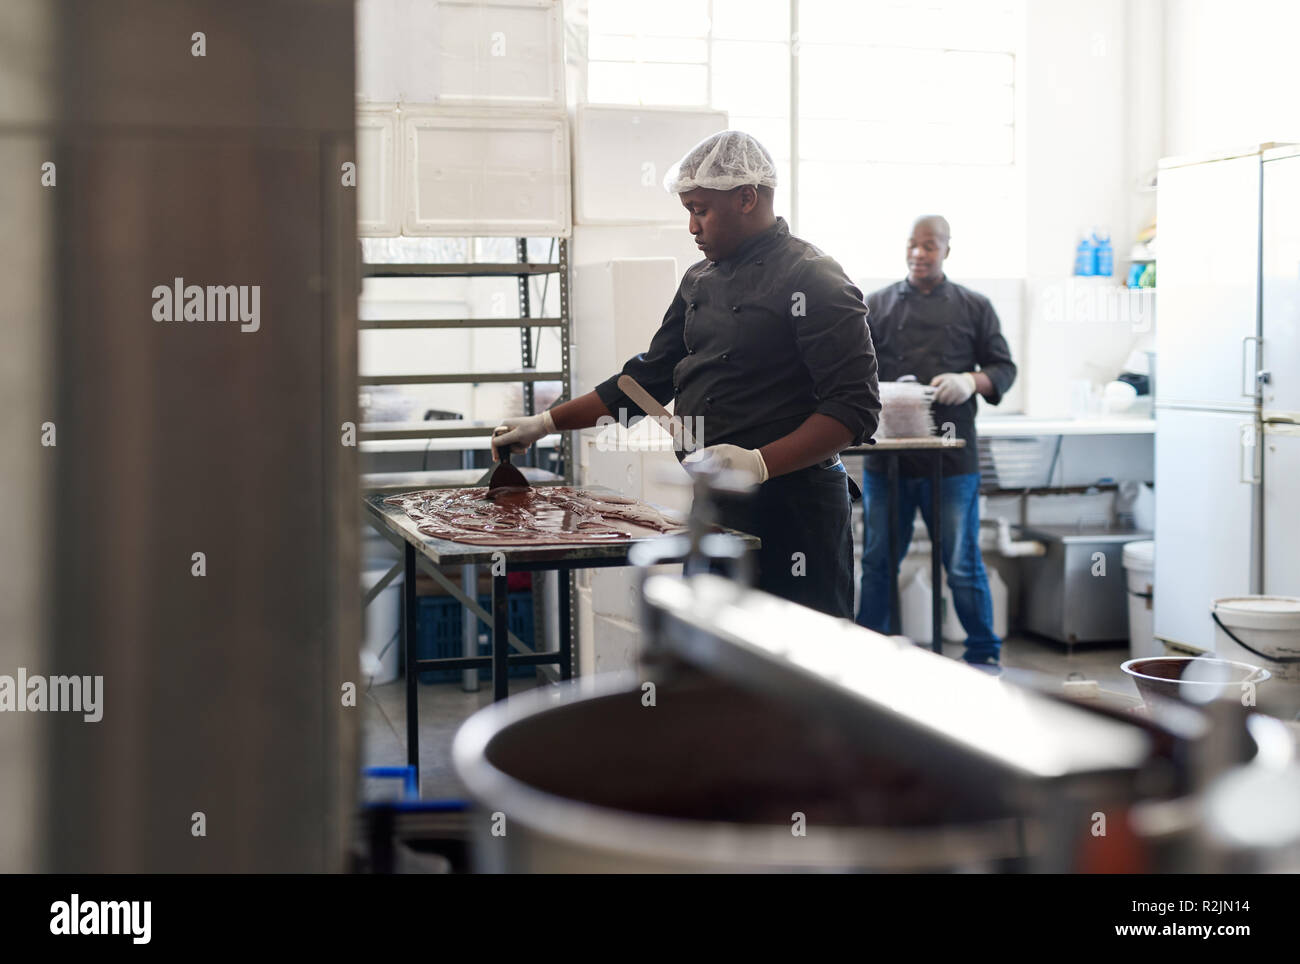 Worker cooling chocolate in a confectionary making factory Stock Photo